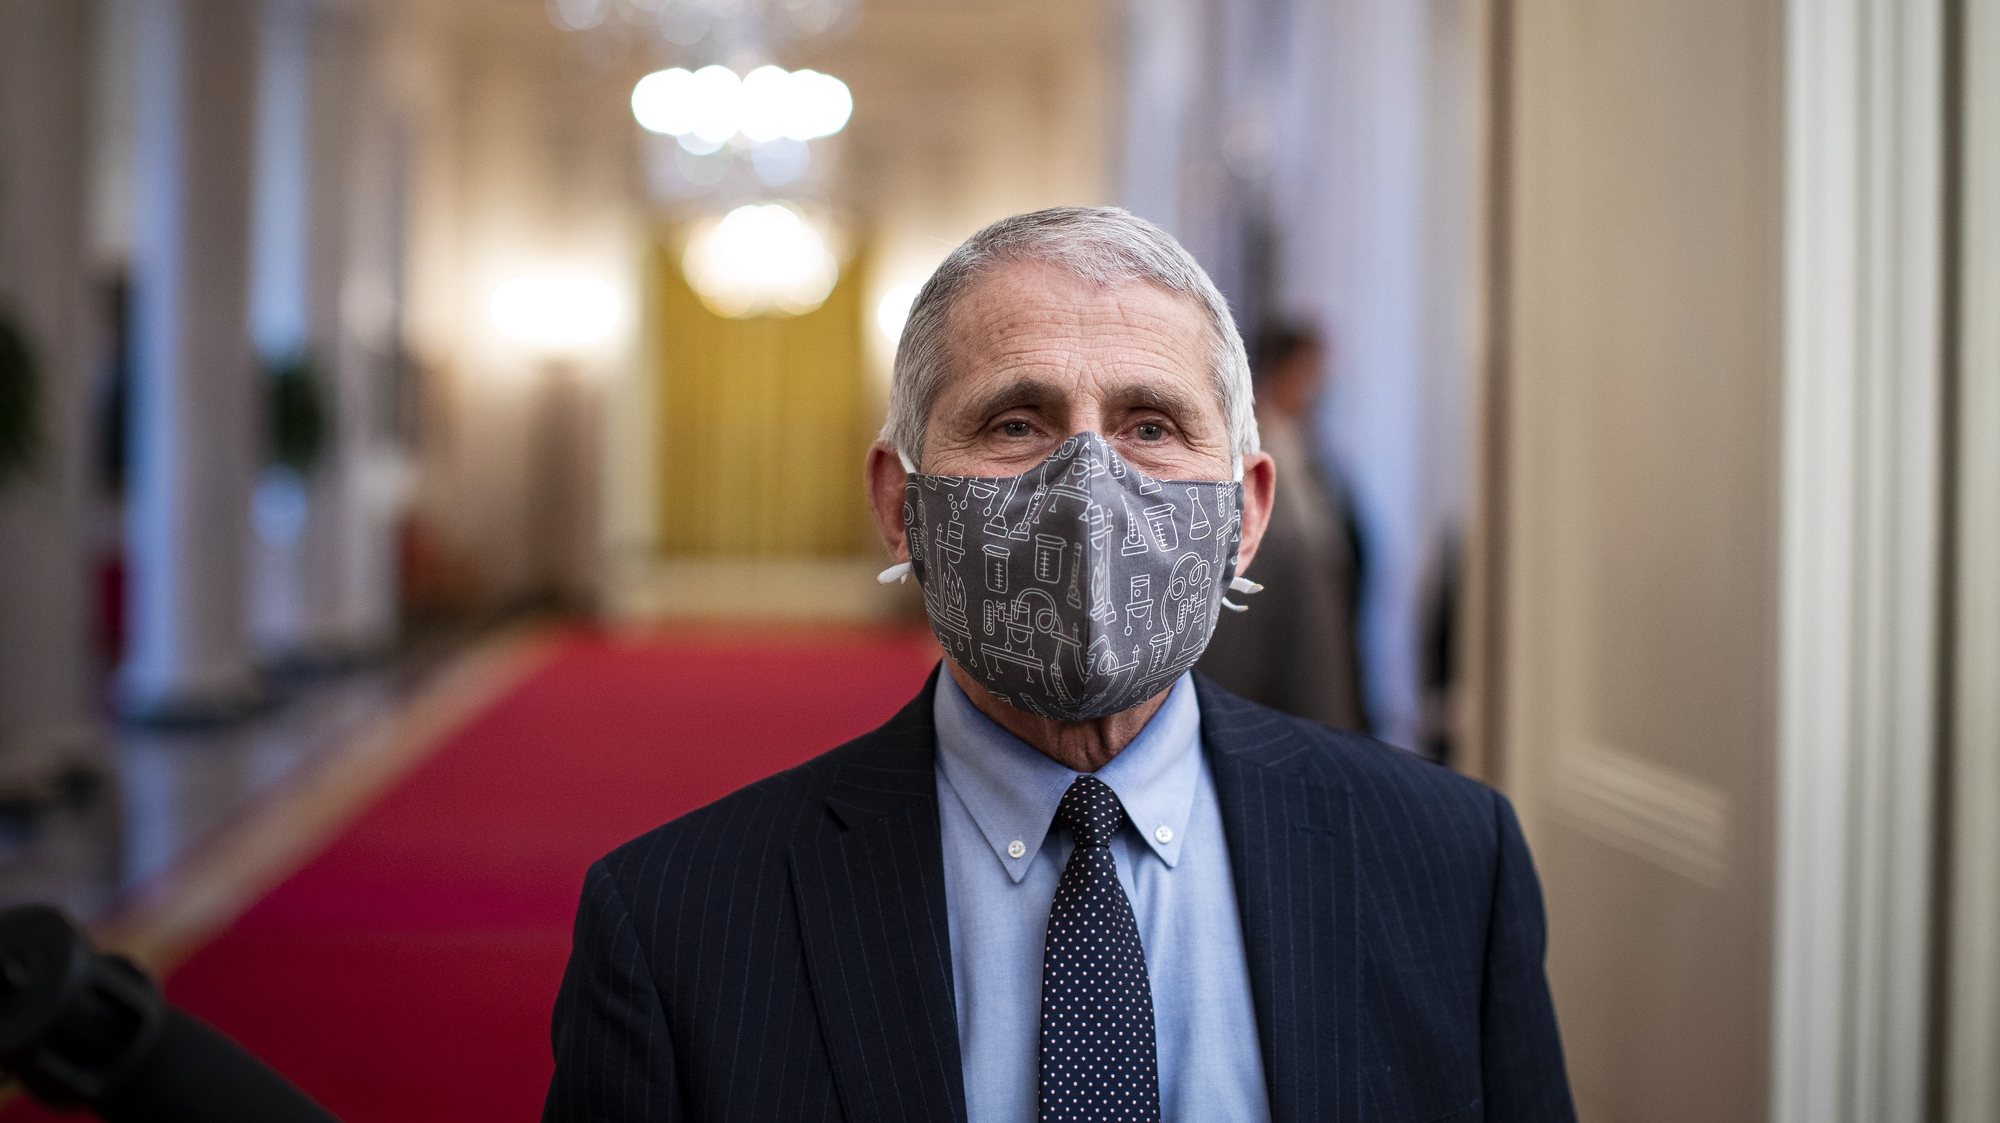 epa08956683 Anthony Fauci, director of the National Institute of Allergy and Infectious Diseases, wears a protective mask while speaking to members of the media before an event on the Biden administration&#039;s Covid-19 response in the State Dining Room of the White House in Washington, DC, USA, on 21 January 2021. Biden in his first full day in office plans to issue a sweeping set of executive orders to tackle the raging Covid-19 pandemic to rapidly reverse or refashion many of his predecessor&#039;s most heavily criticized policies.  EPA/Al Drago / POOL